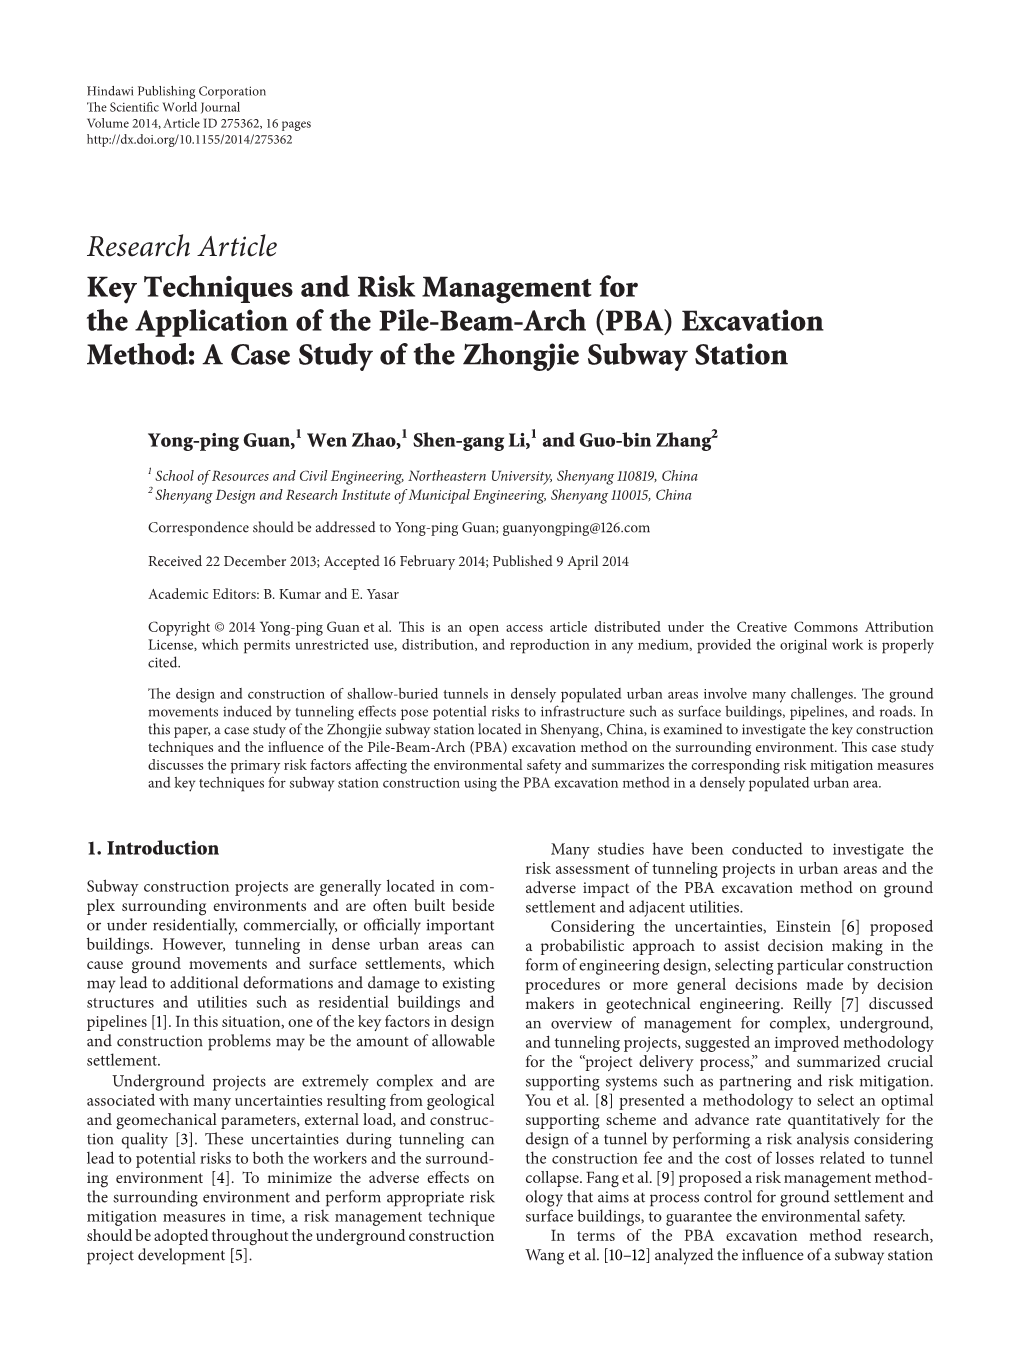 (PBA) Excavation Method: a Case Study of the Zhongjie Subway Station